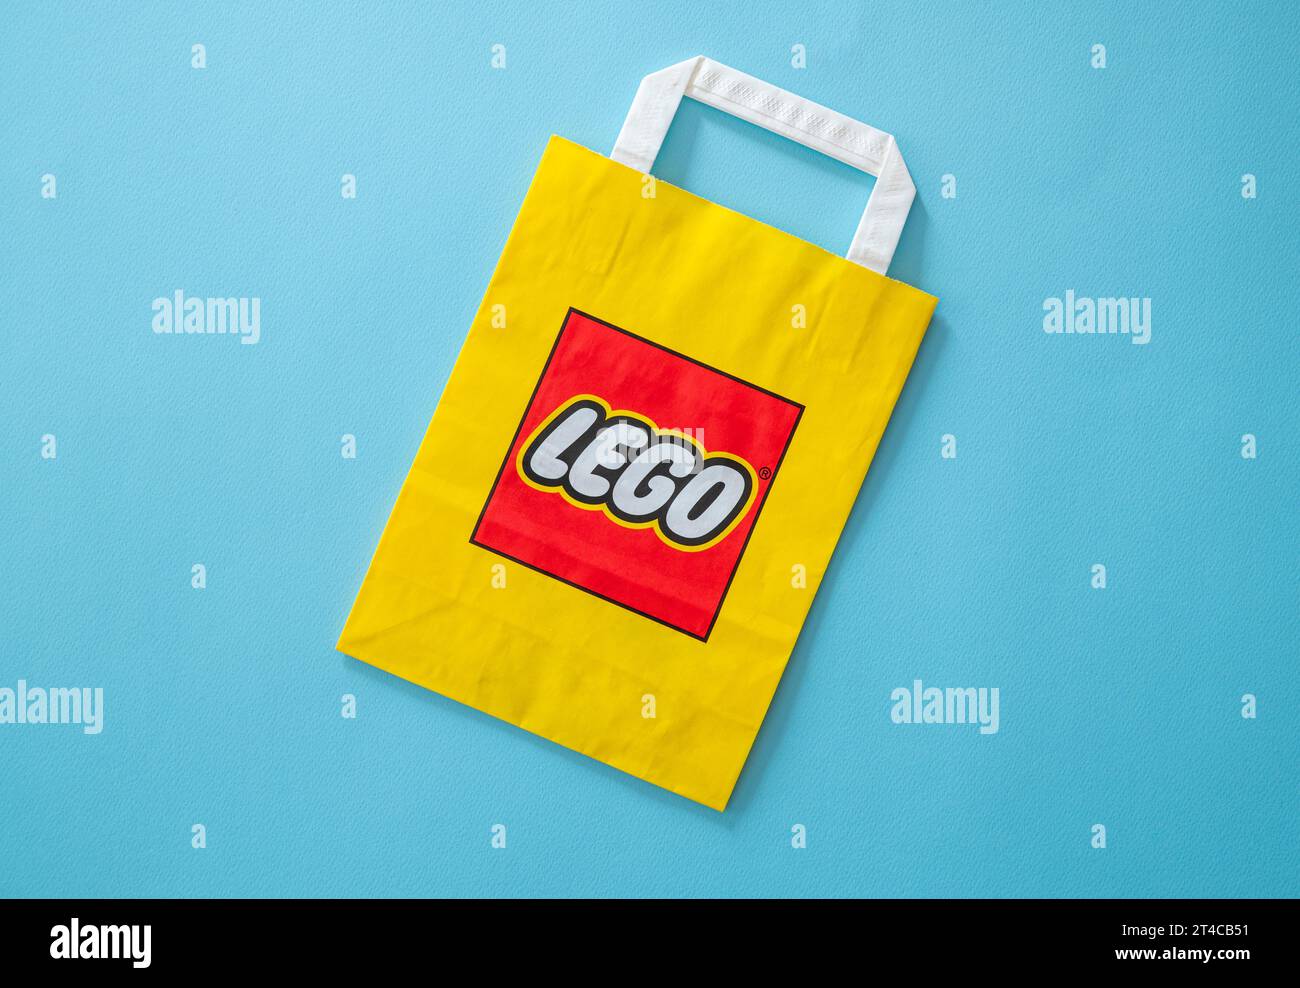 Antalya, Turkey - October 26, 2023: Branded yellow paper bag of Lego Group Corporation with logo Stock Photo